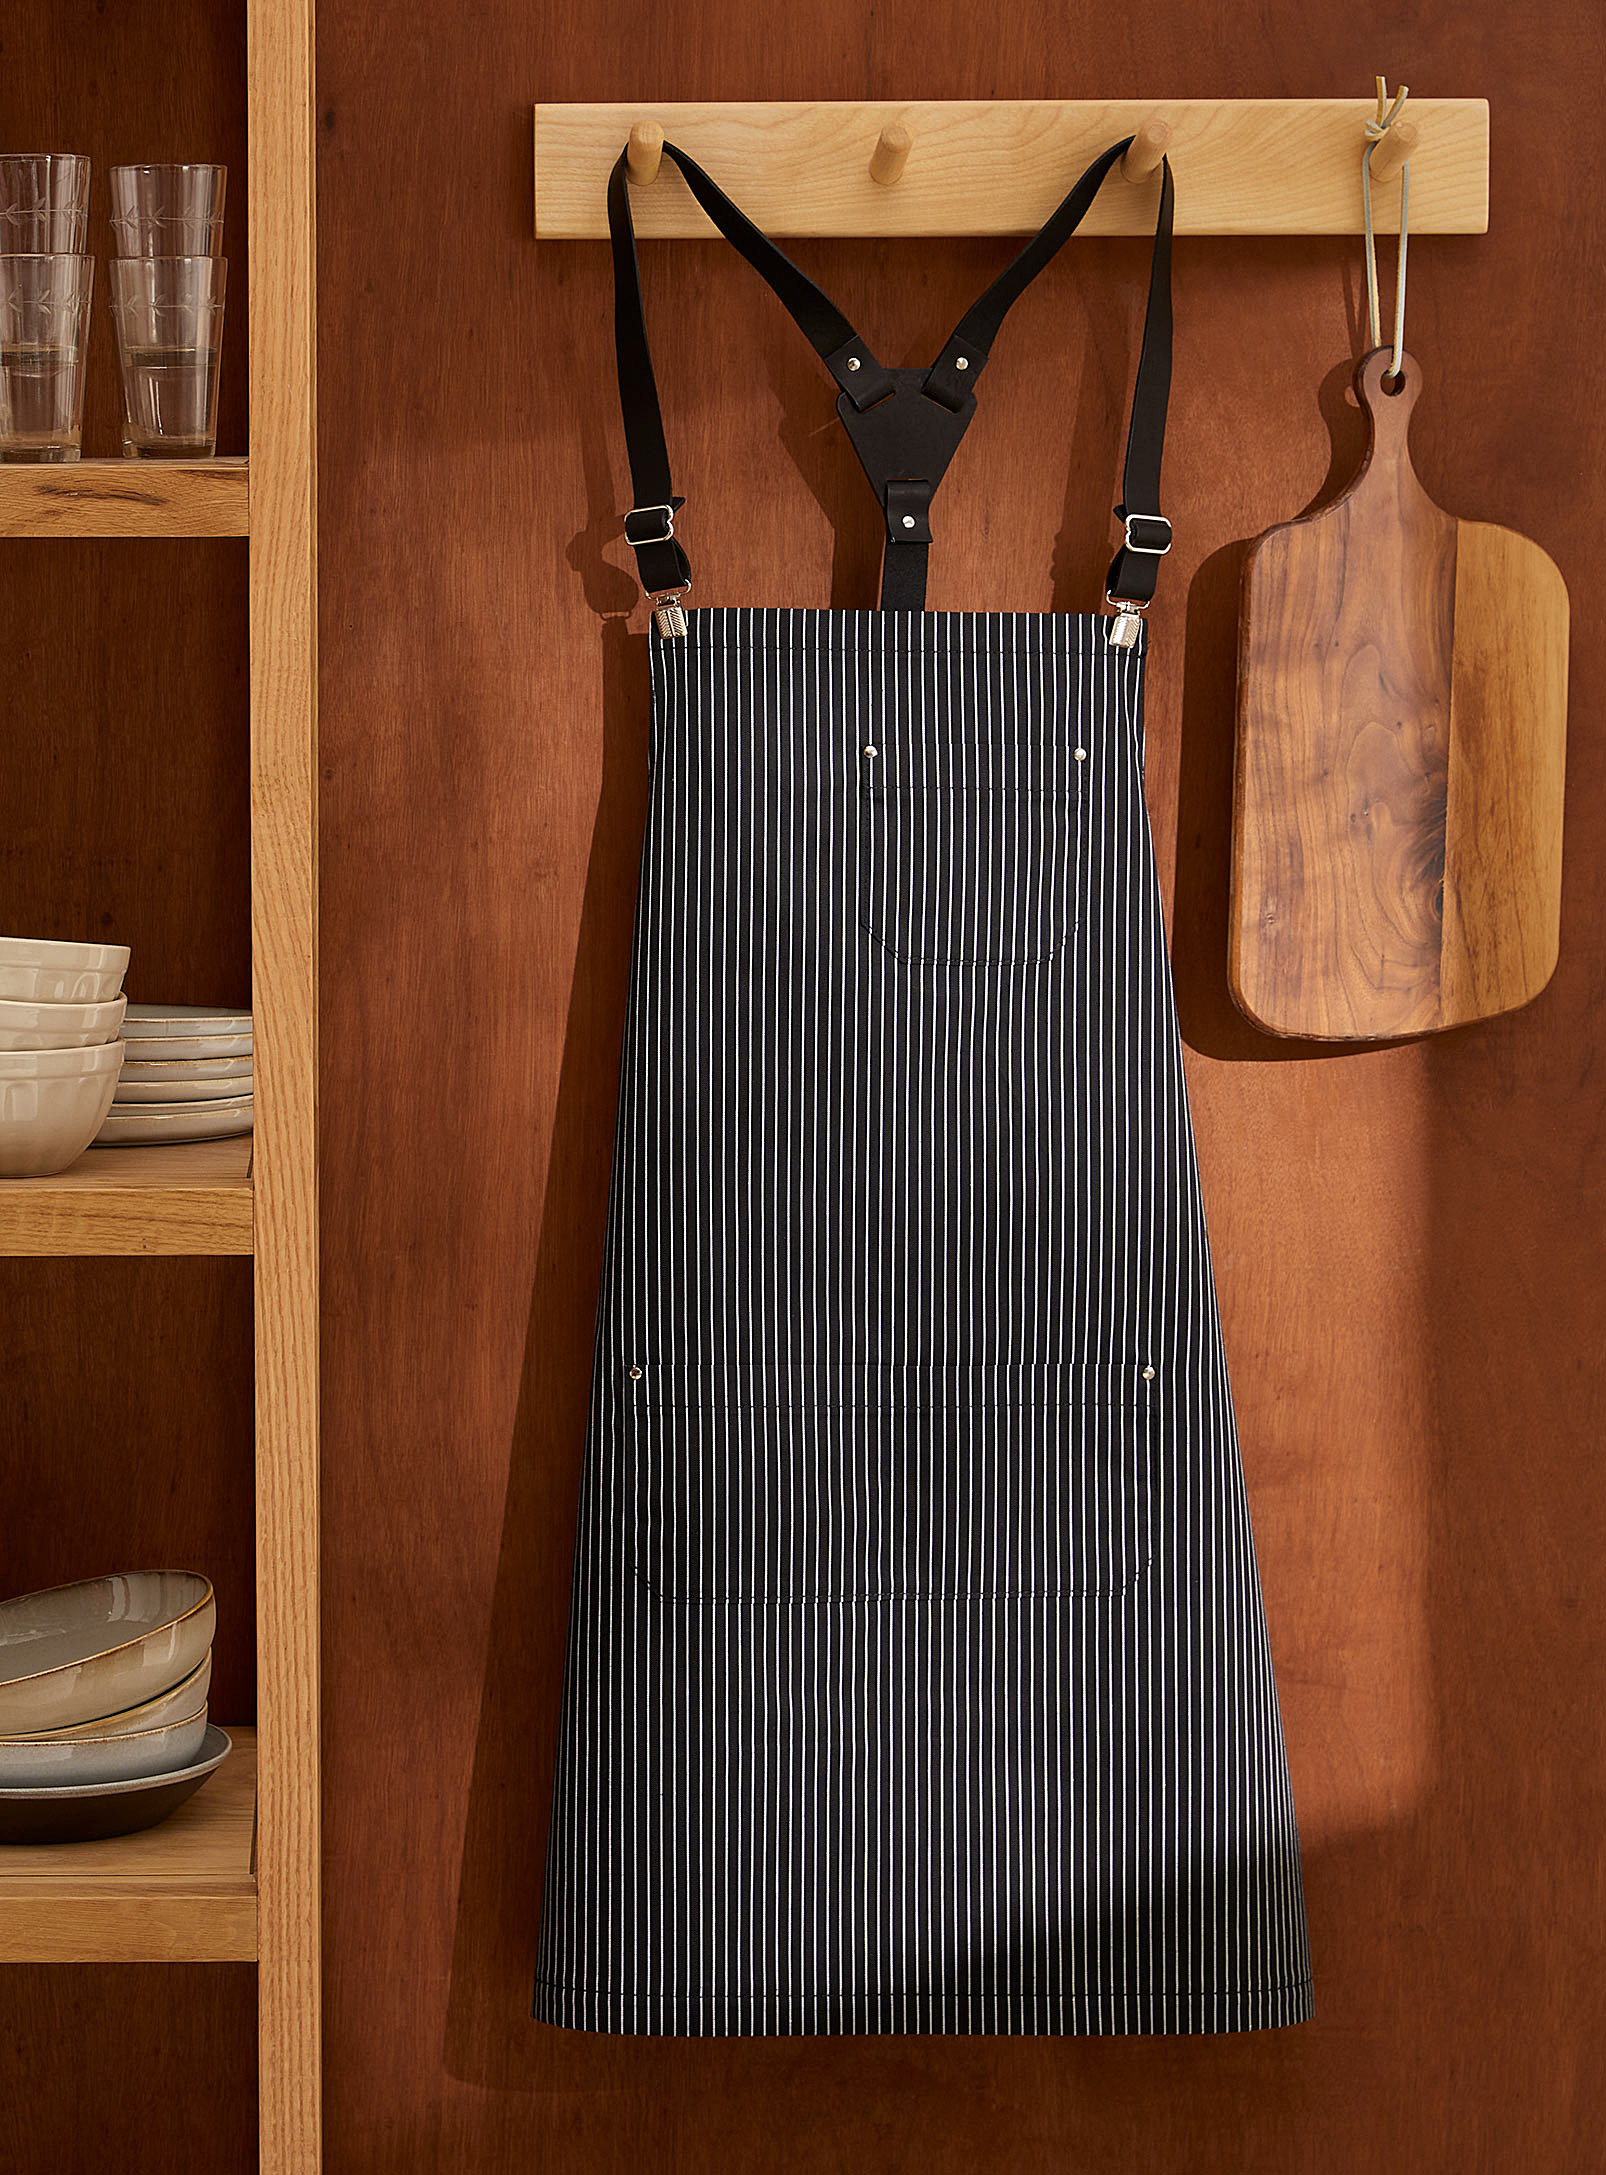 Atelier Chalet Pinstripe Leather And Cotton Apron In Marine Blue